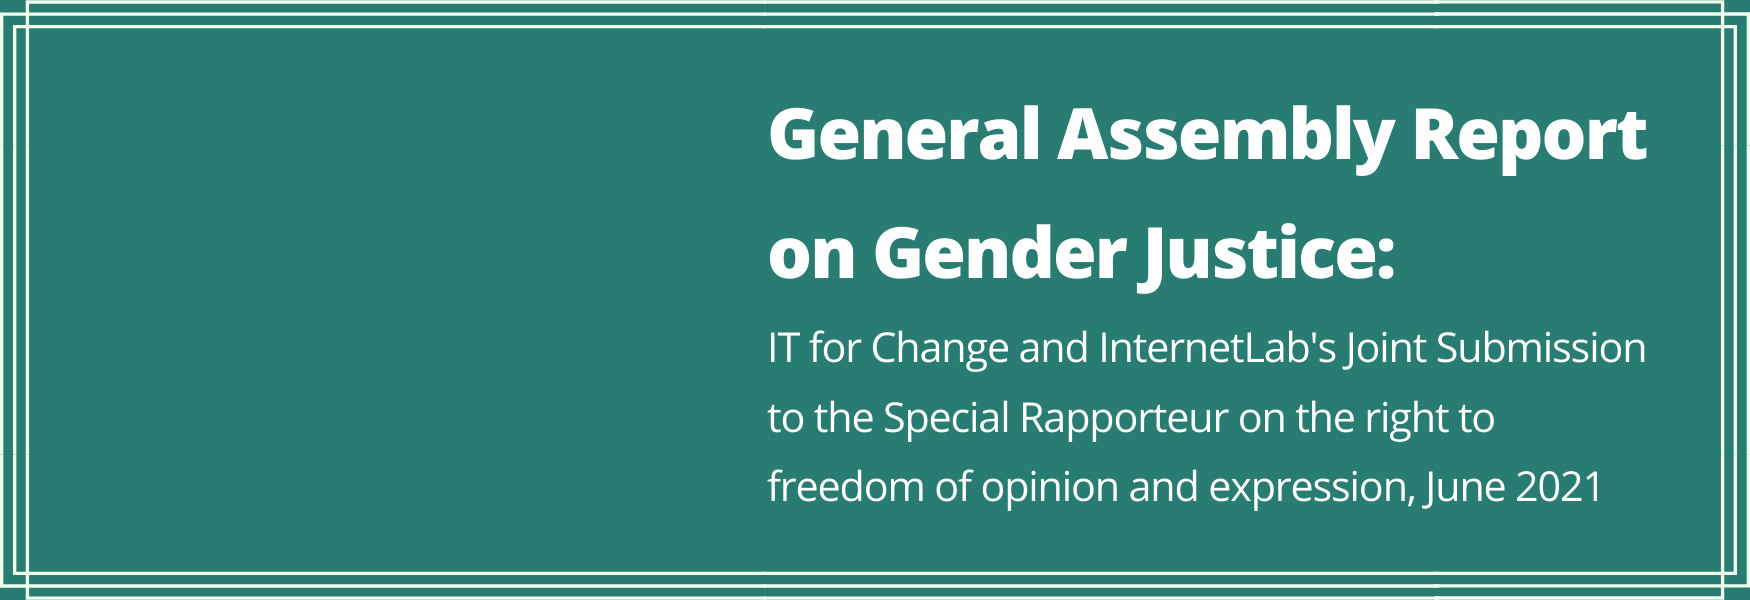 Submission to the Special Rapporteur on the right to freedom of opinion and expression for the UNGA Report on Gender Justice